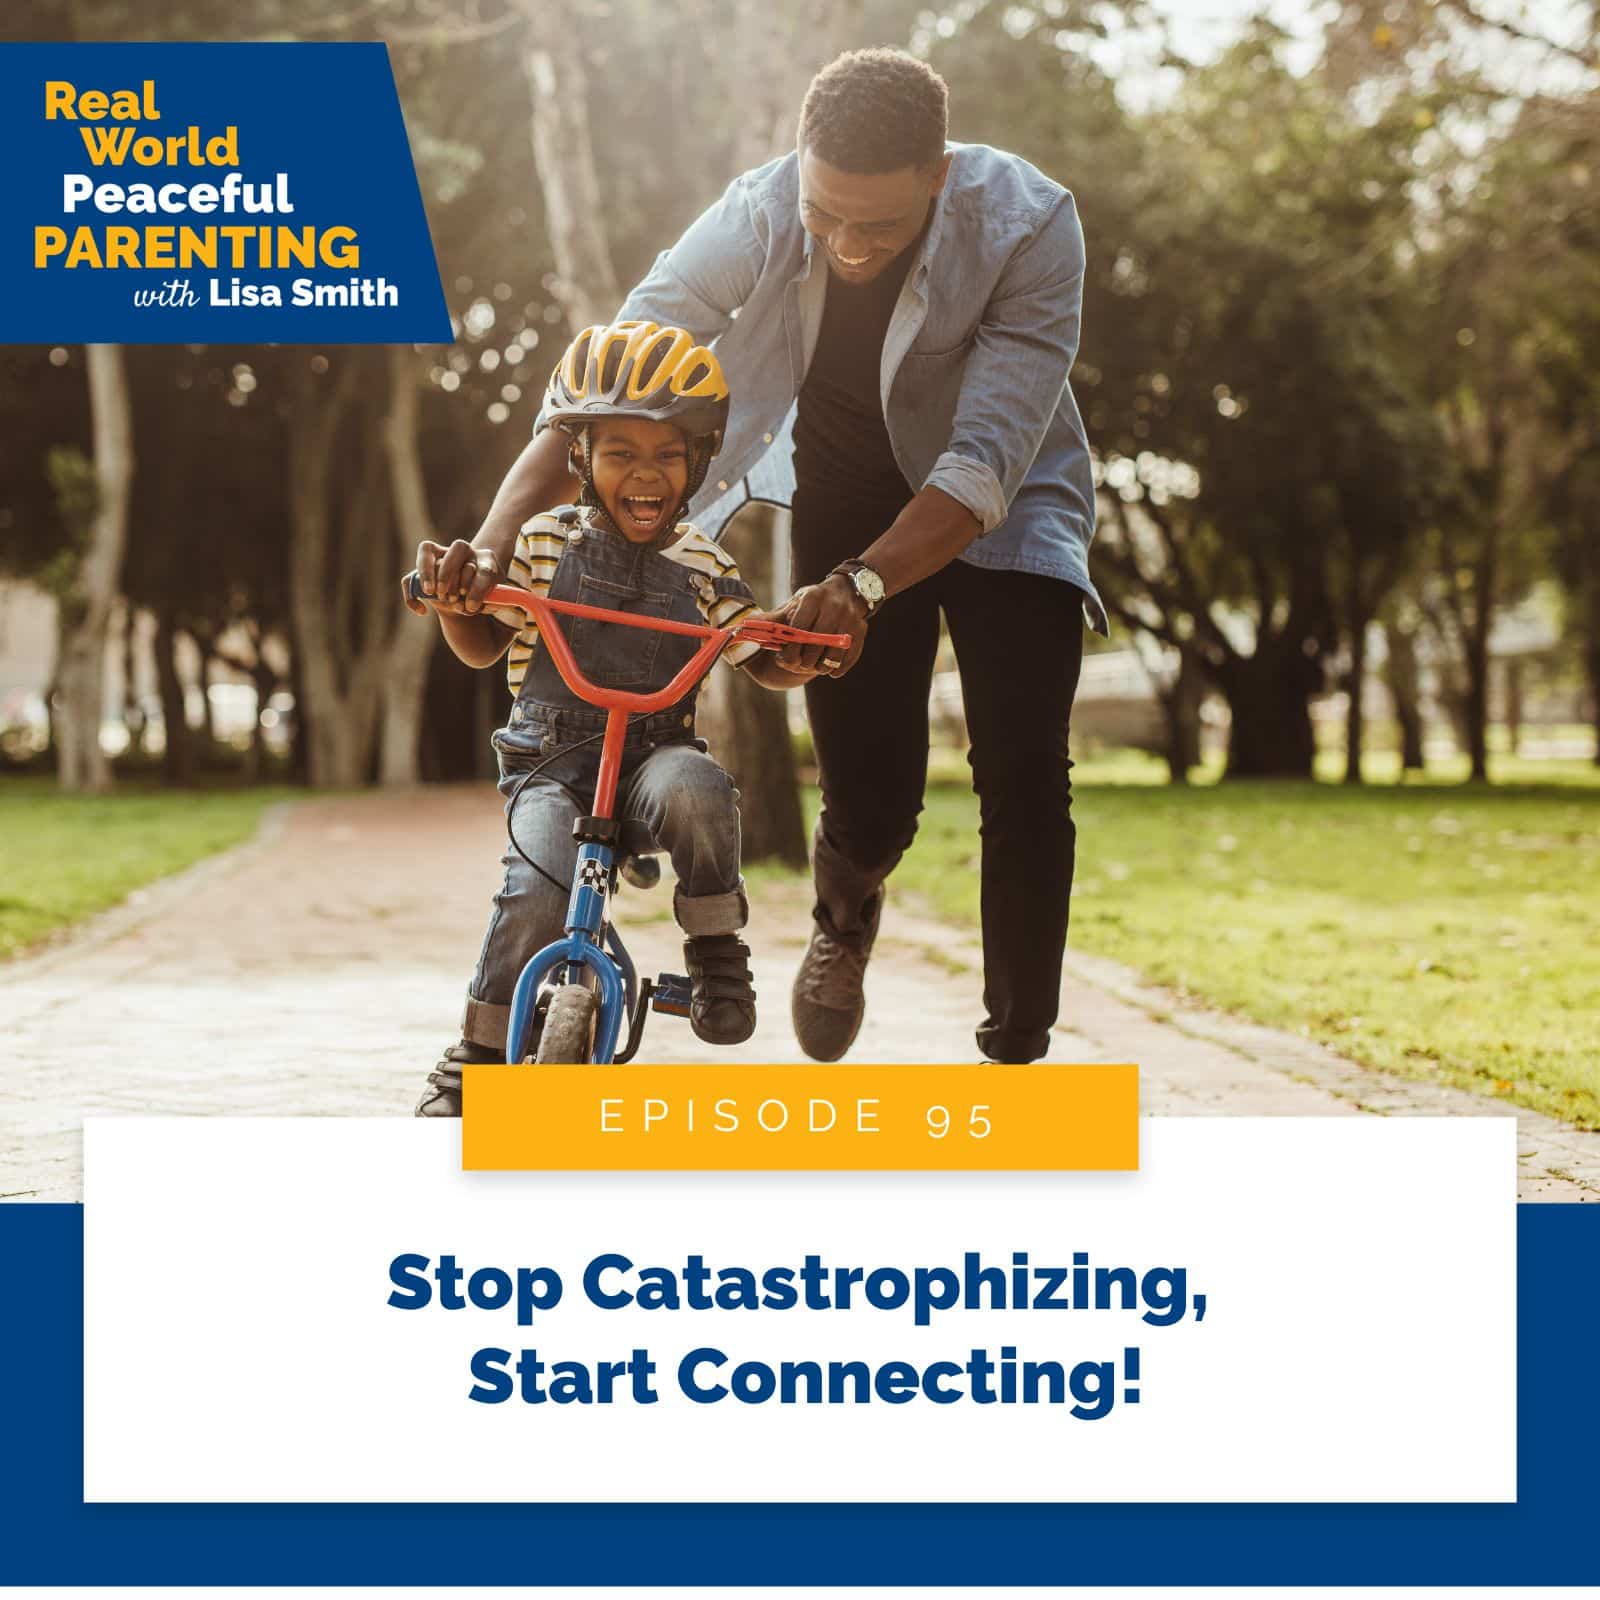 Real World Peaceful Parenting with Lisa Smith | Stop Catastrophizing, Start Connecting!